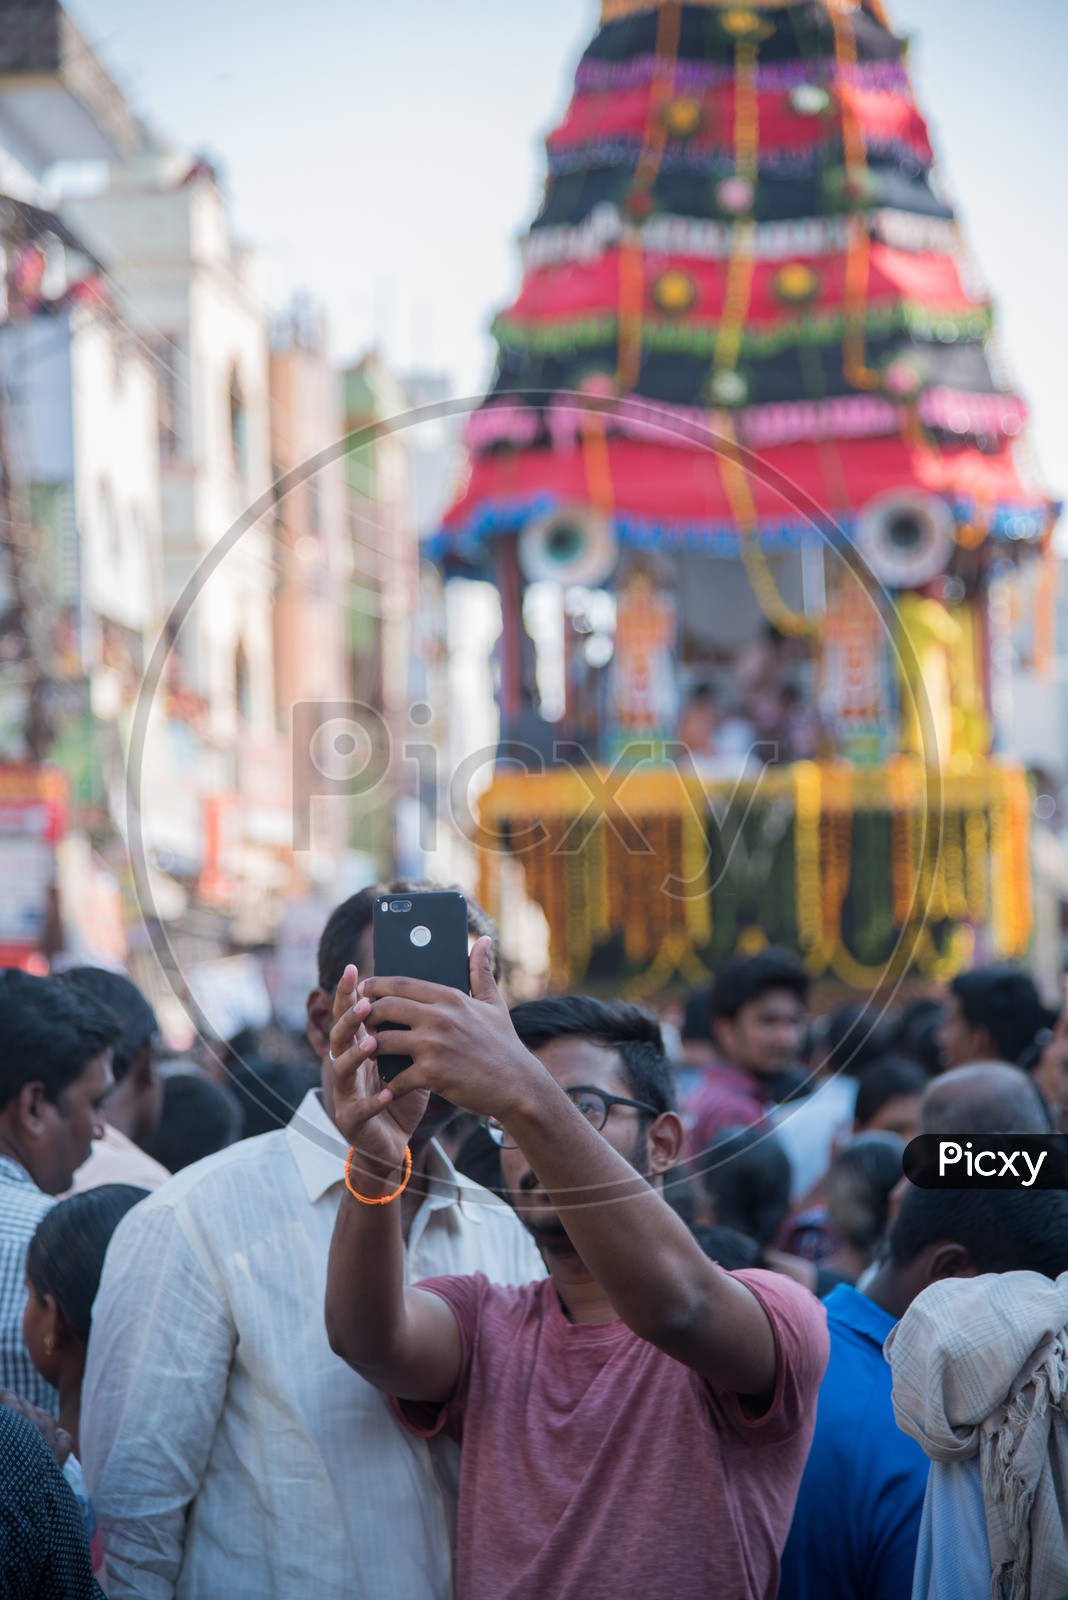 A father,son duo taking a selfie with Panakala Laxmi Narasimha Swamy Chariot in the Background